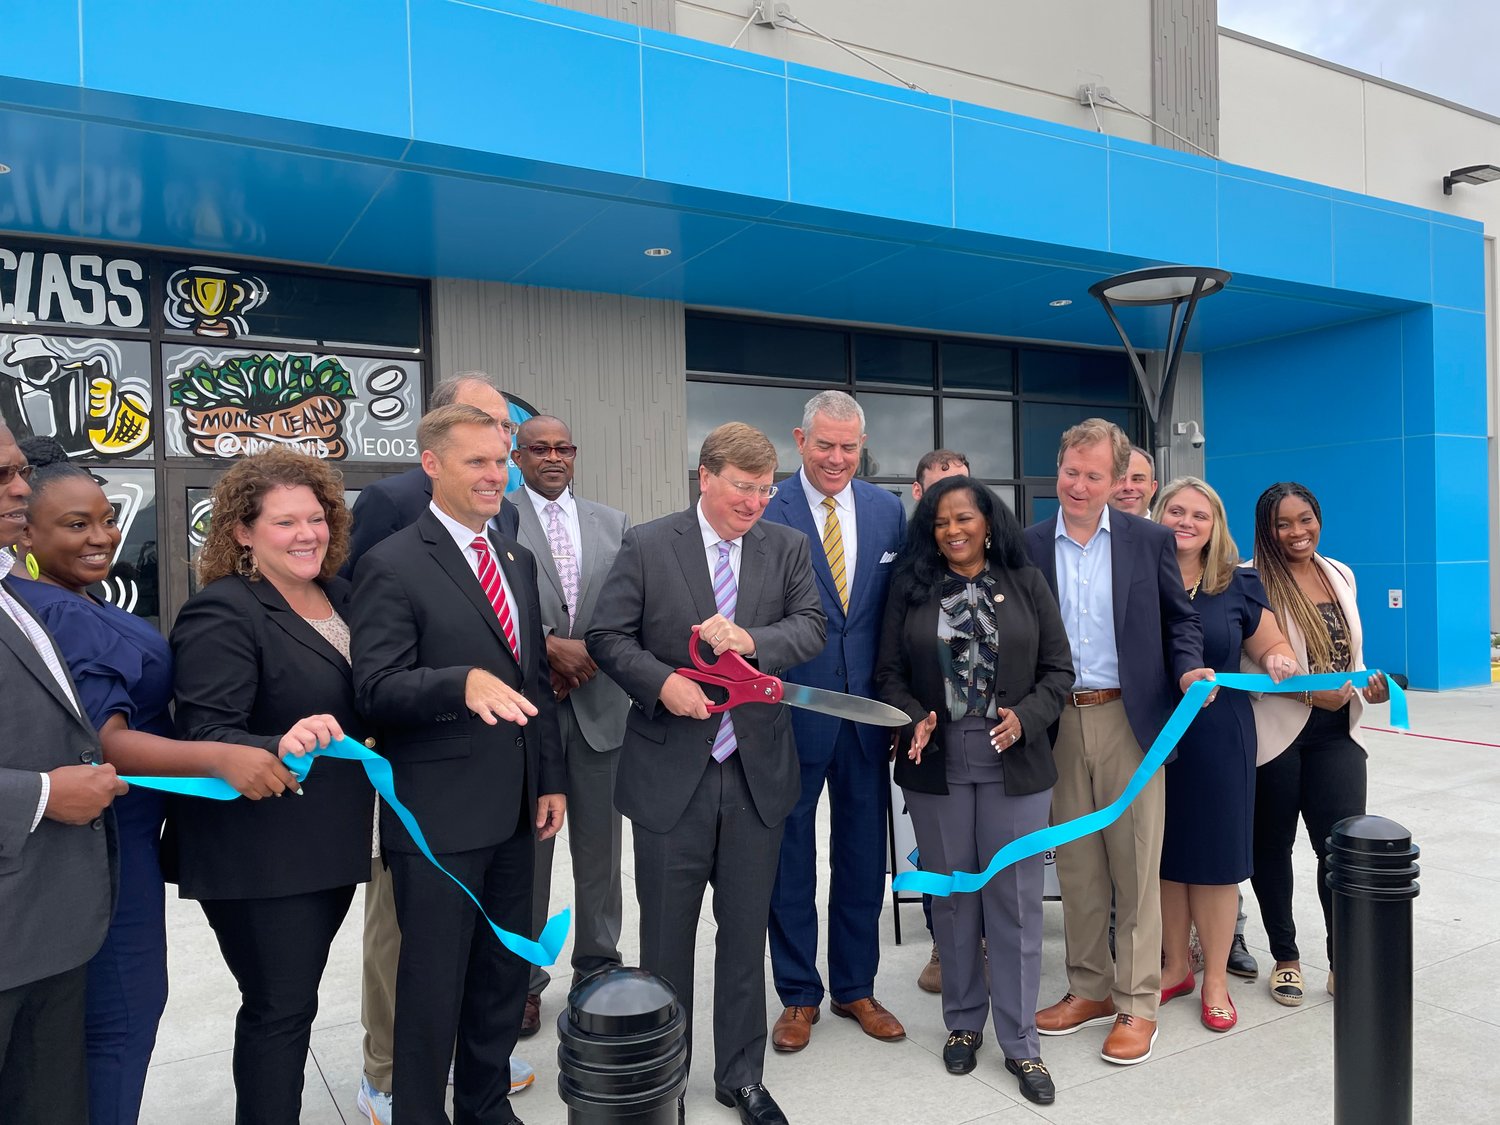 Gov. Tate Reeves, middle, flanked by U.S. Rep. Michael Guest, Lt. Gov. Delbert Hosemann, Speaker of the House Philip Gunn and a host of other county and business leaders cut the ribbon on the new Amazon distribution facility in Madison County last week.